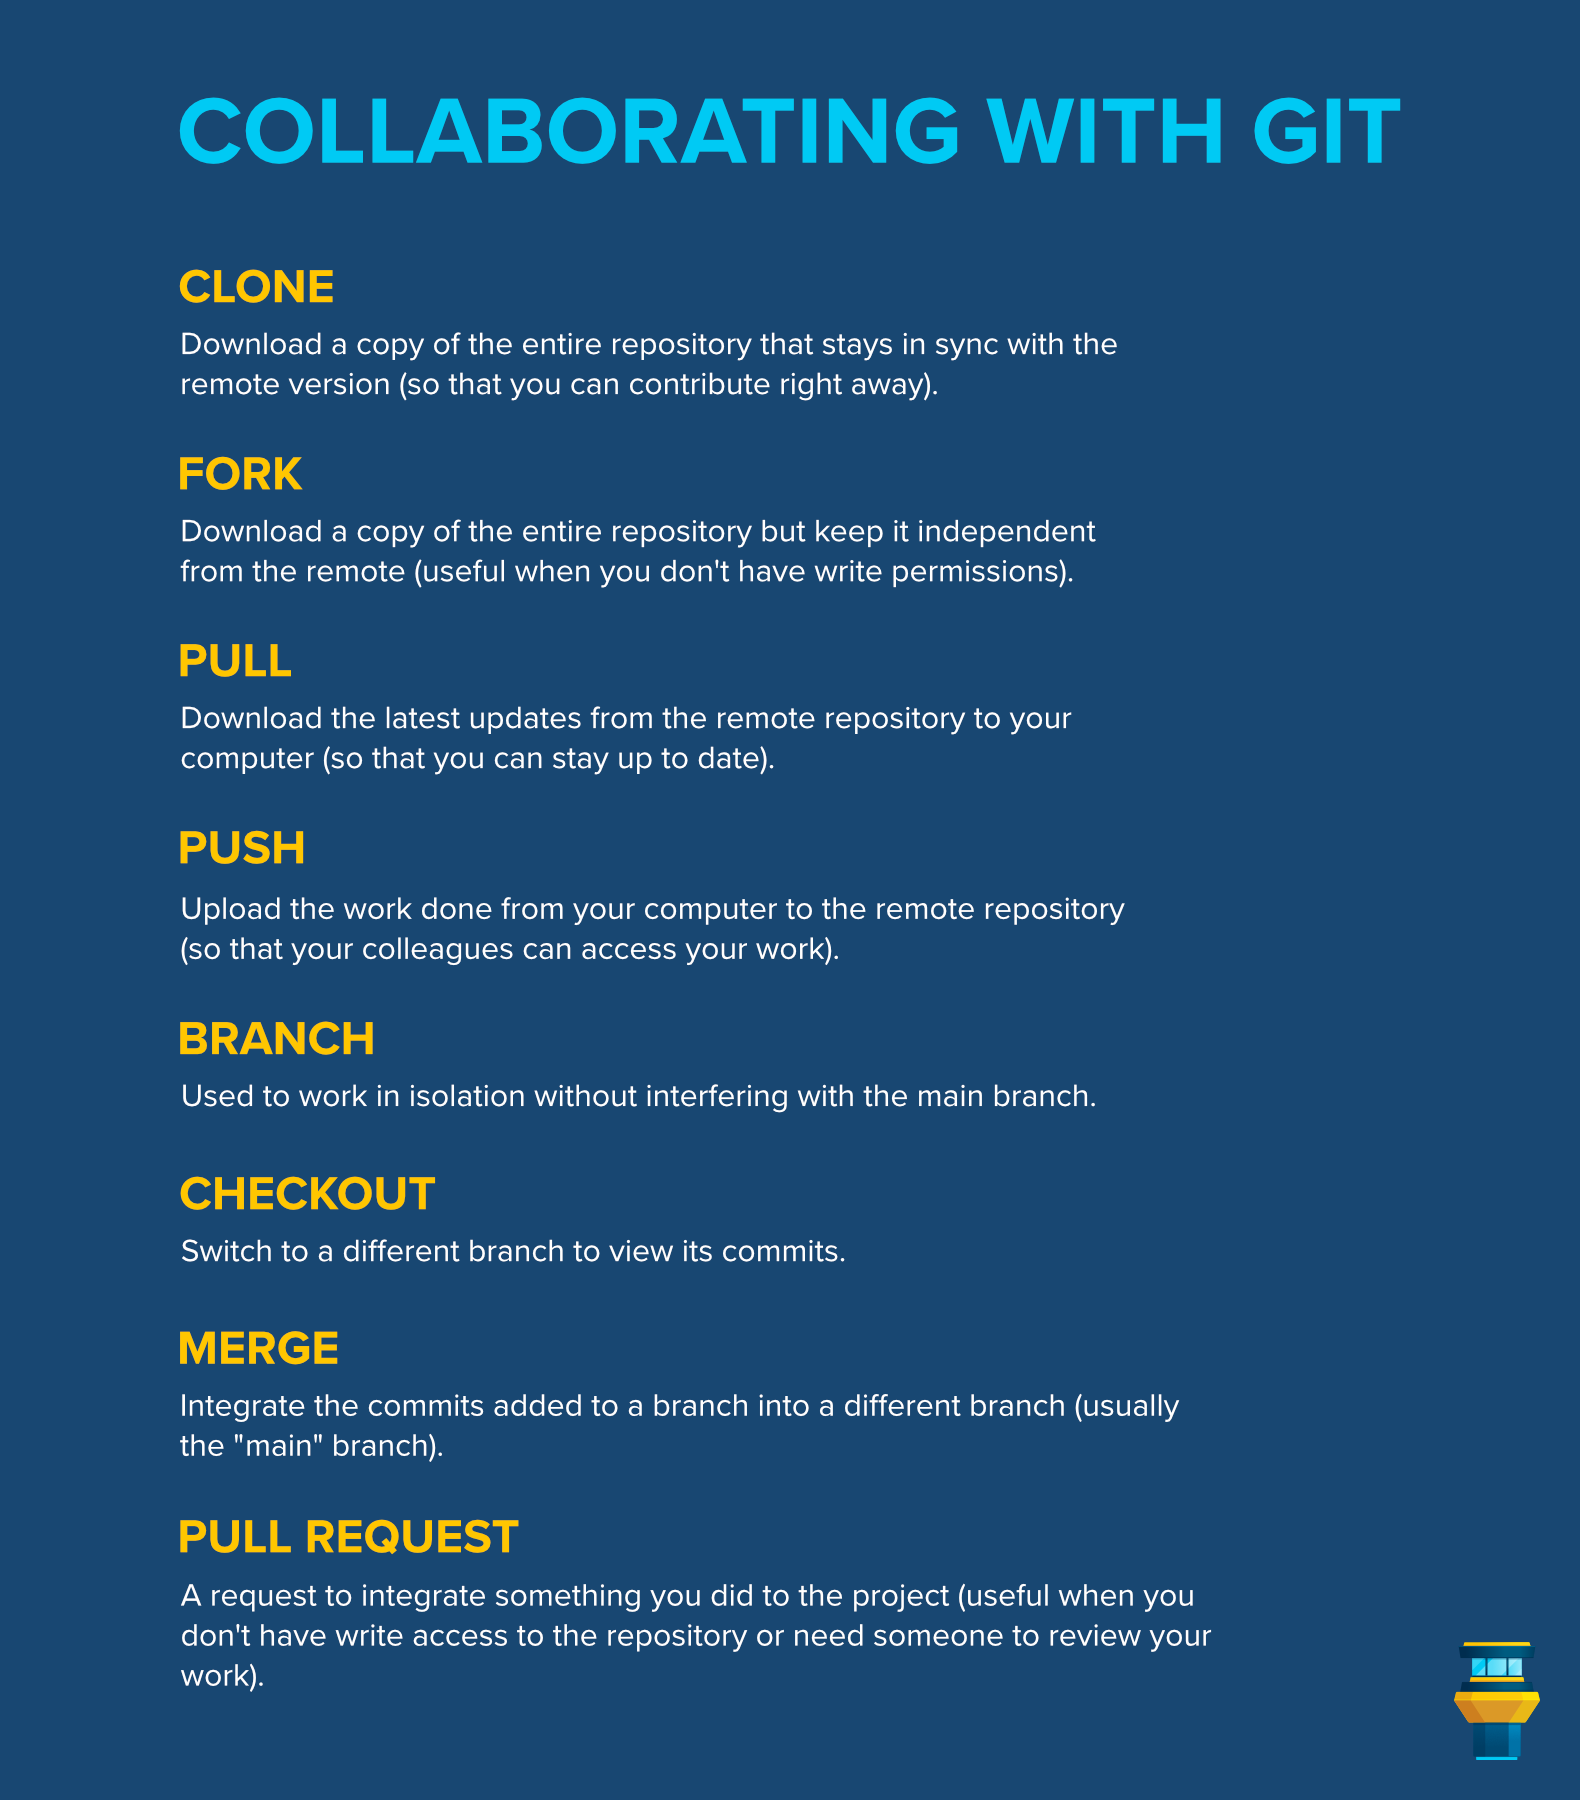 Collaborating with Git